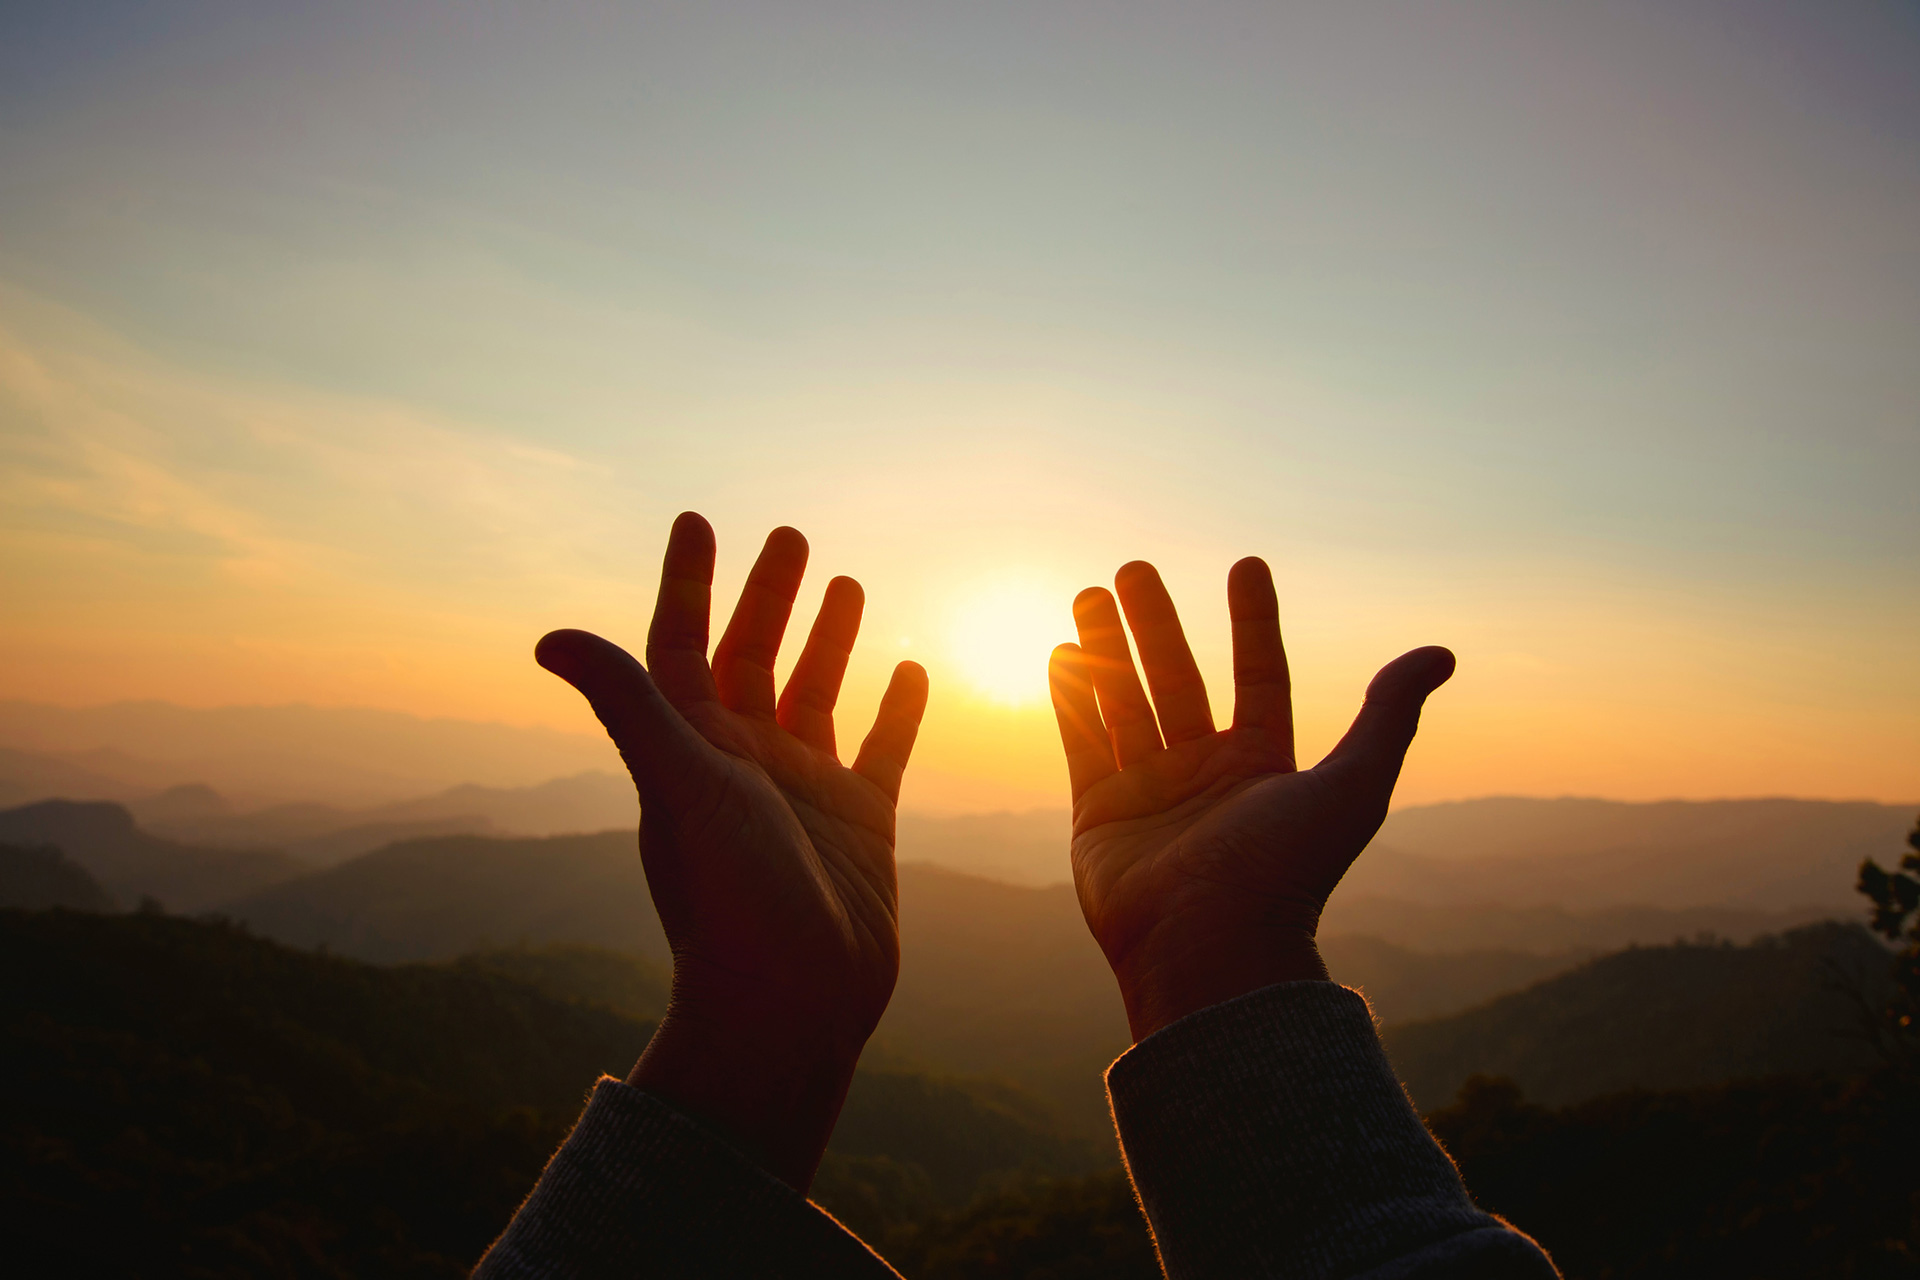 open hands reaching towards the sunset in the mountains